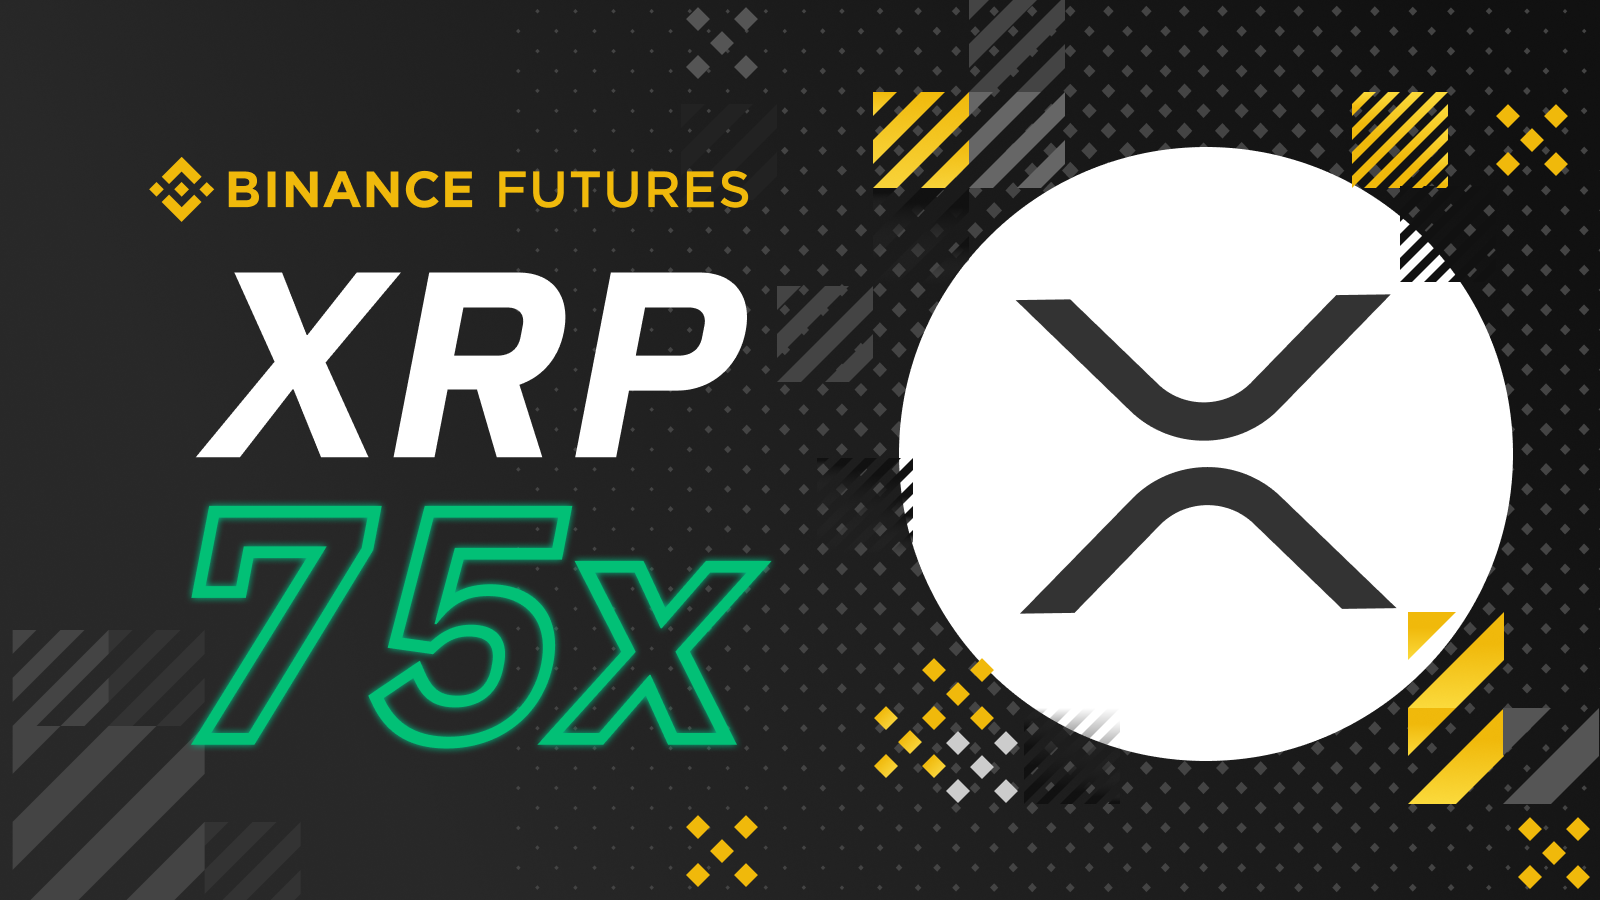 Binance Futures Adds XRP/USDT Contracts with 75x Leverage ...